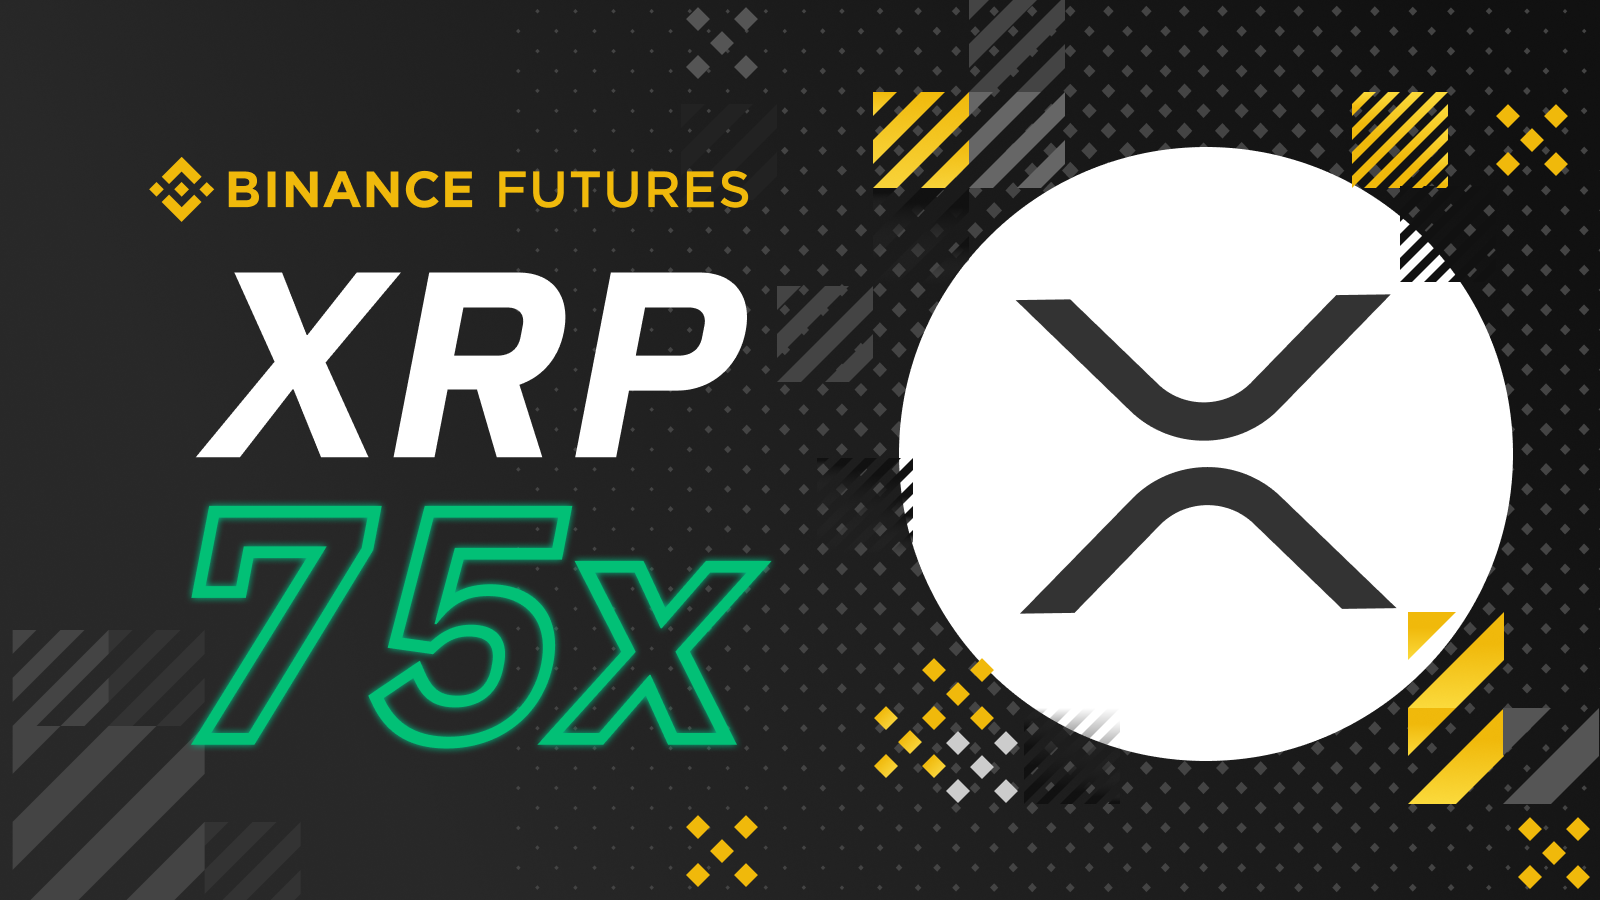 Binance Futures Adds XRP/USDT Contracts with 75x Leverage ...